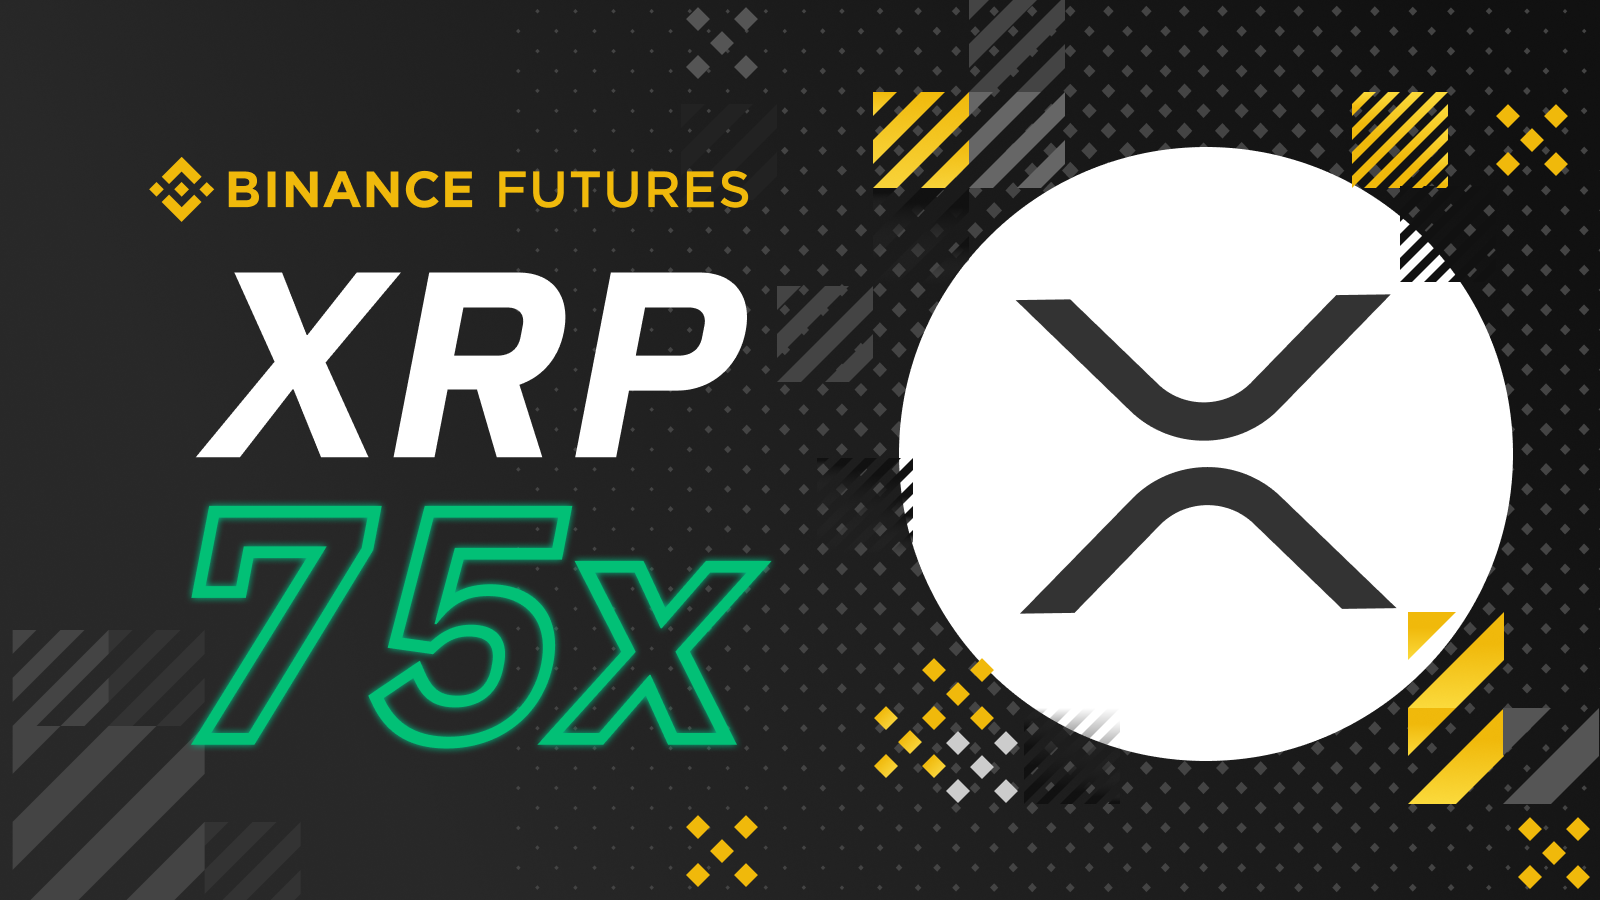 Binance Futures Adds XRP/USDT Contracts with 75x Leverage ...